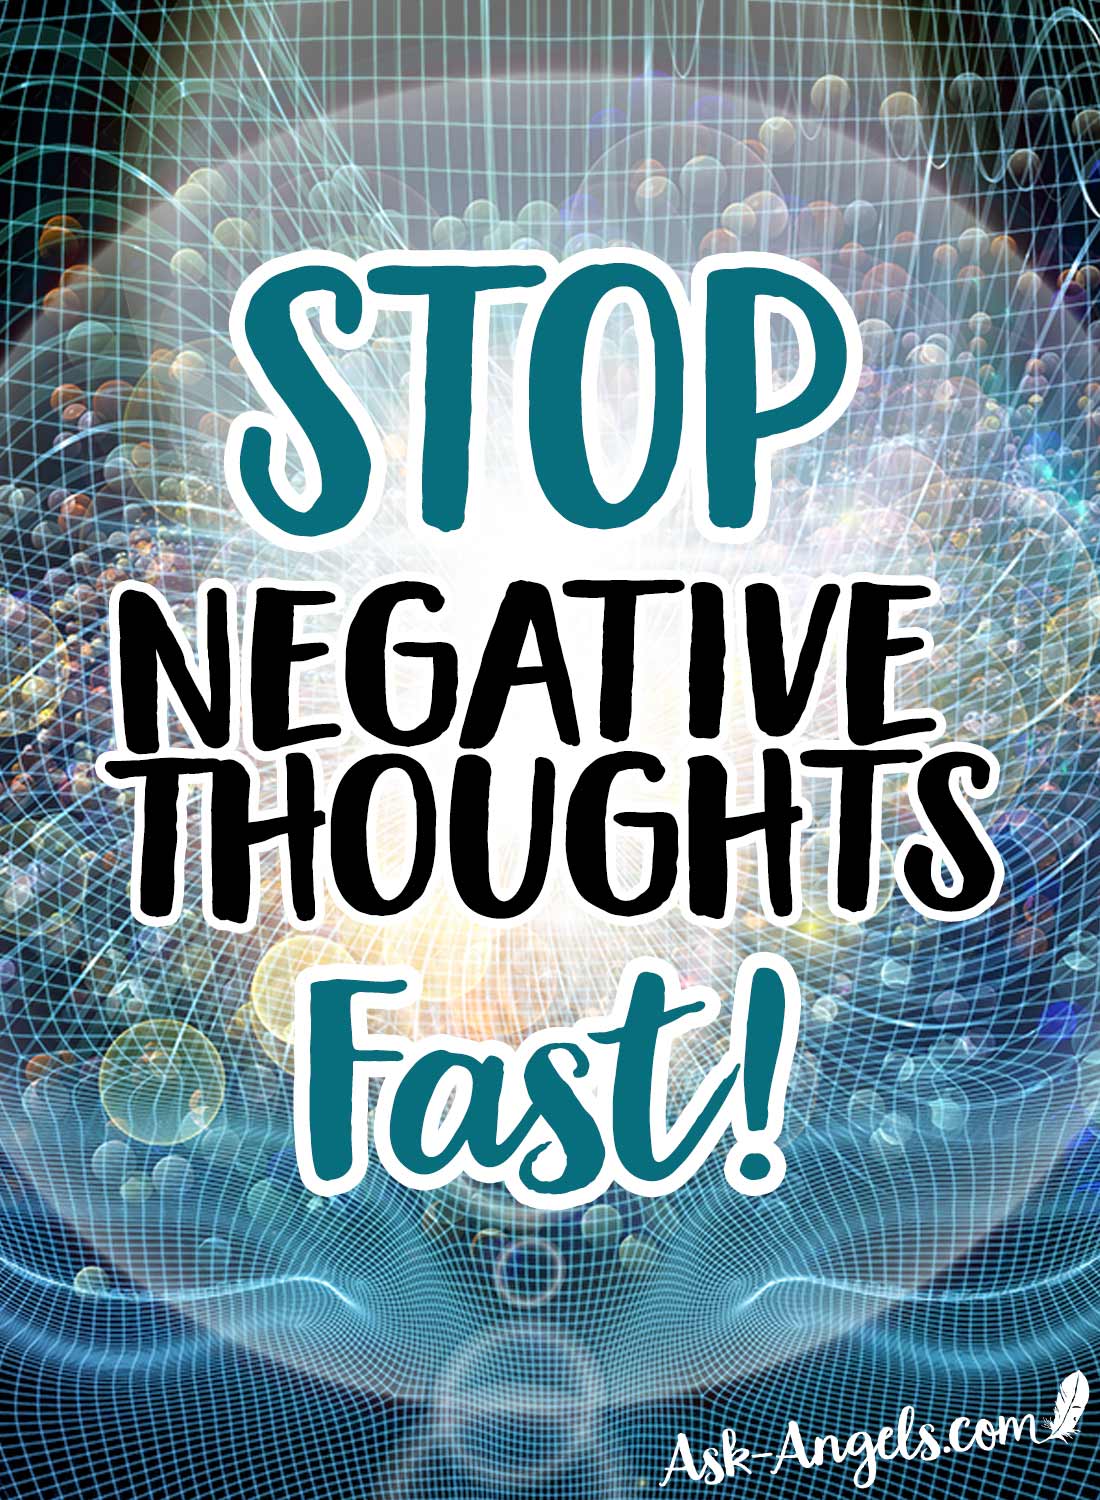 Negative thinking lowers your vibration and blocks you off from manifesting what you really want. So how do you STOP your Negative Thoughts in their tracks?